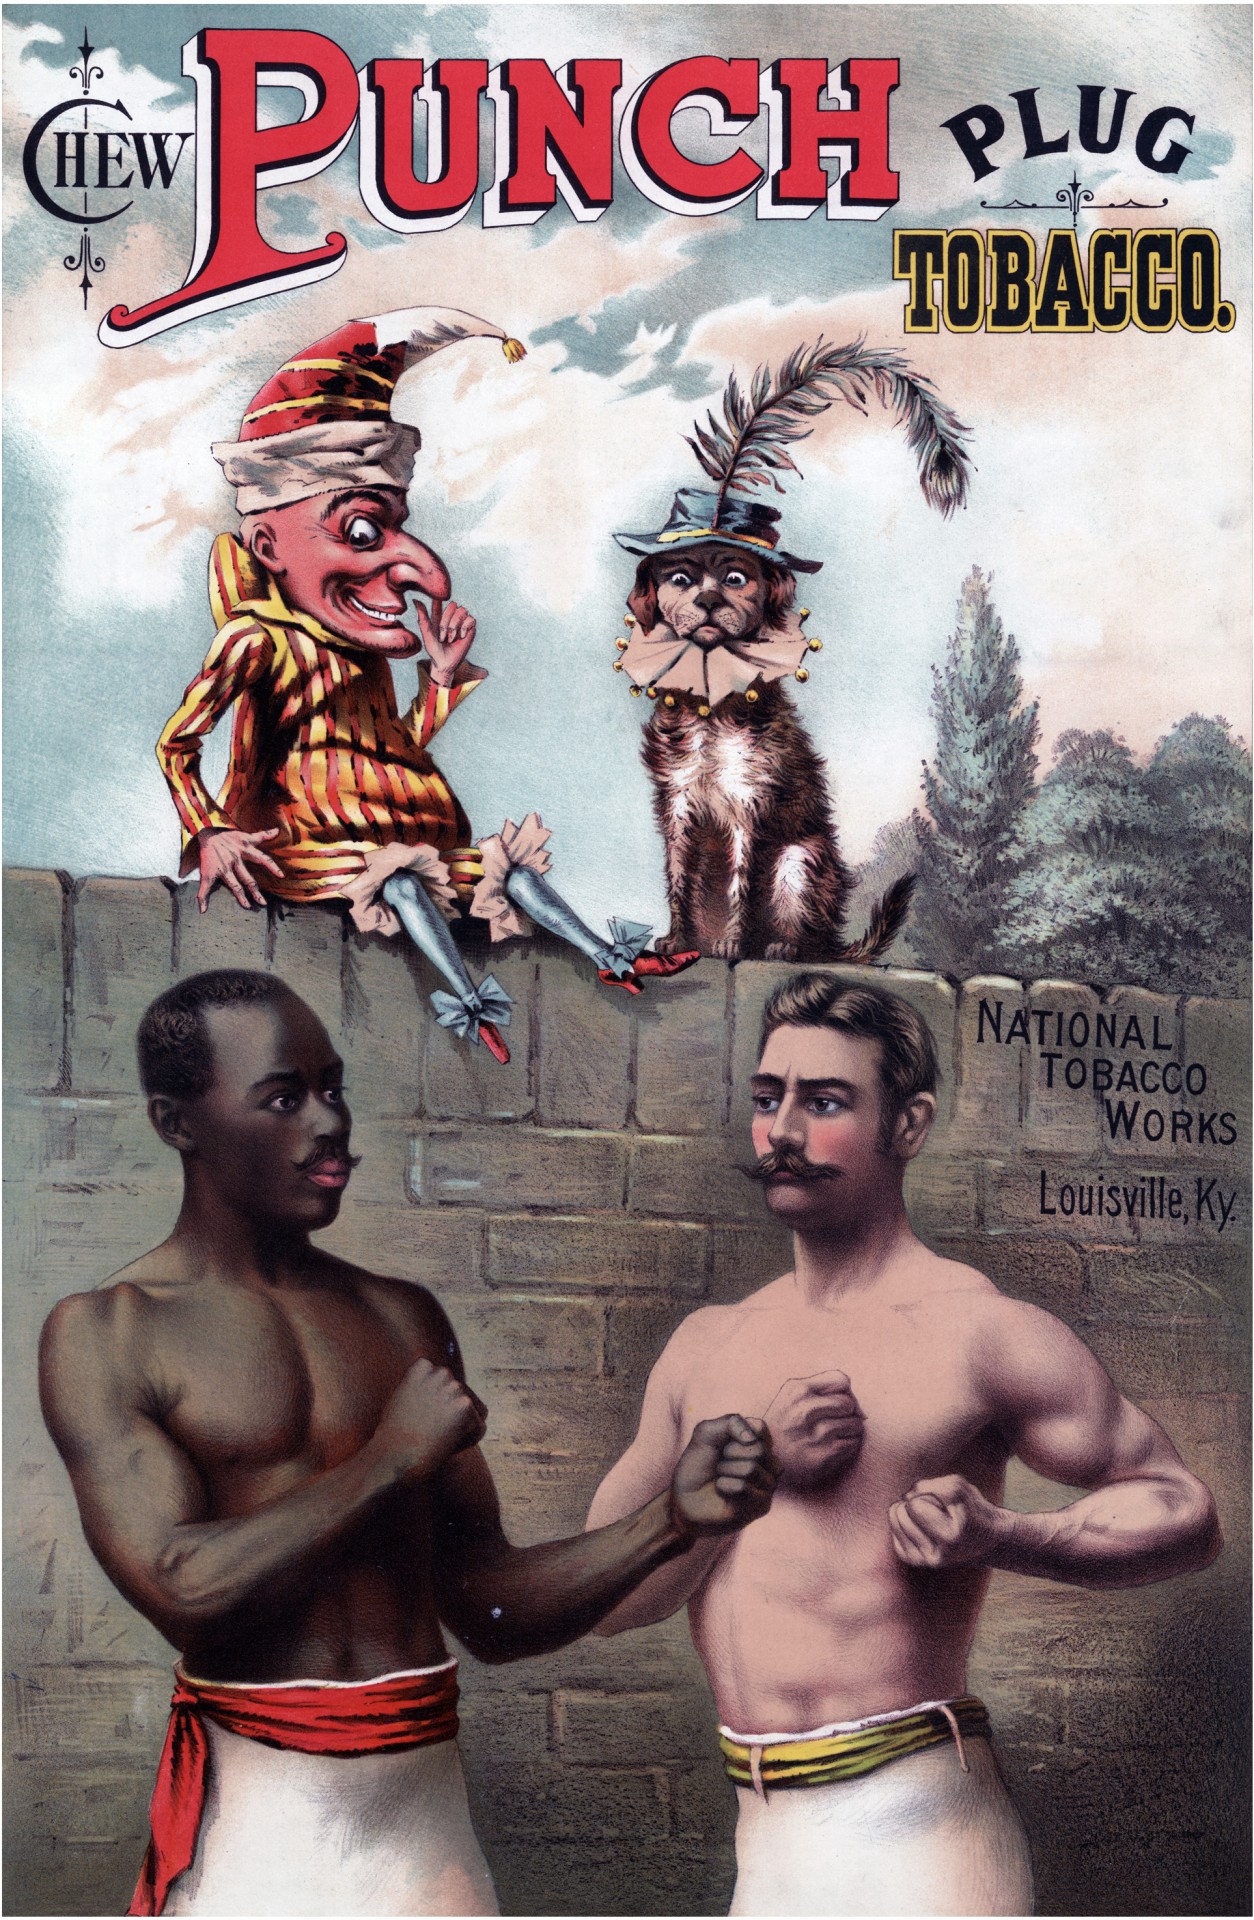 Public domain vintage poster of two men boxing for punch tobacco